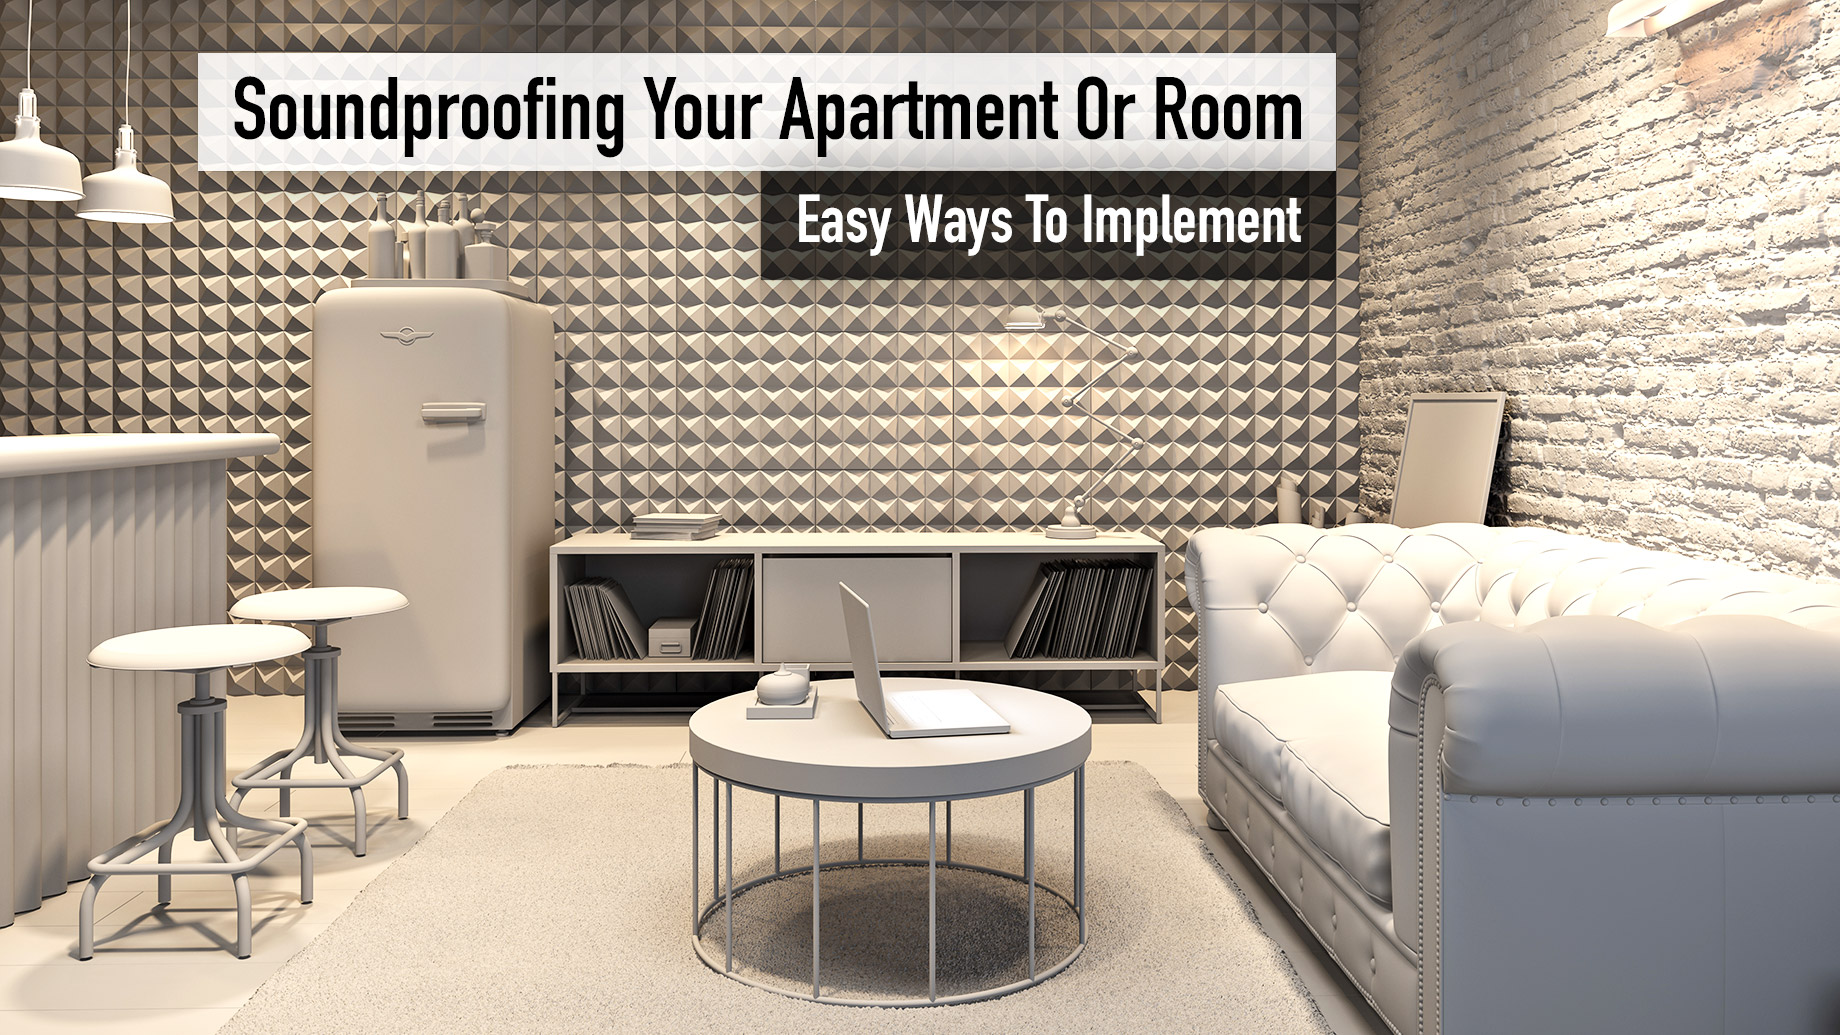 Soundproofing Your Apartment Or Room - Easy Ways To Implement